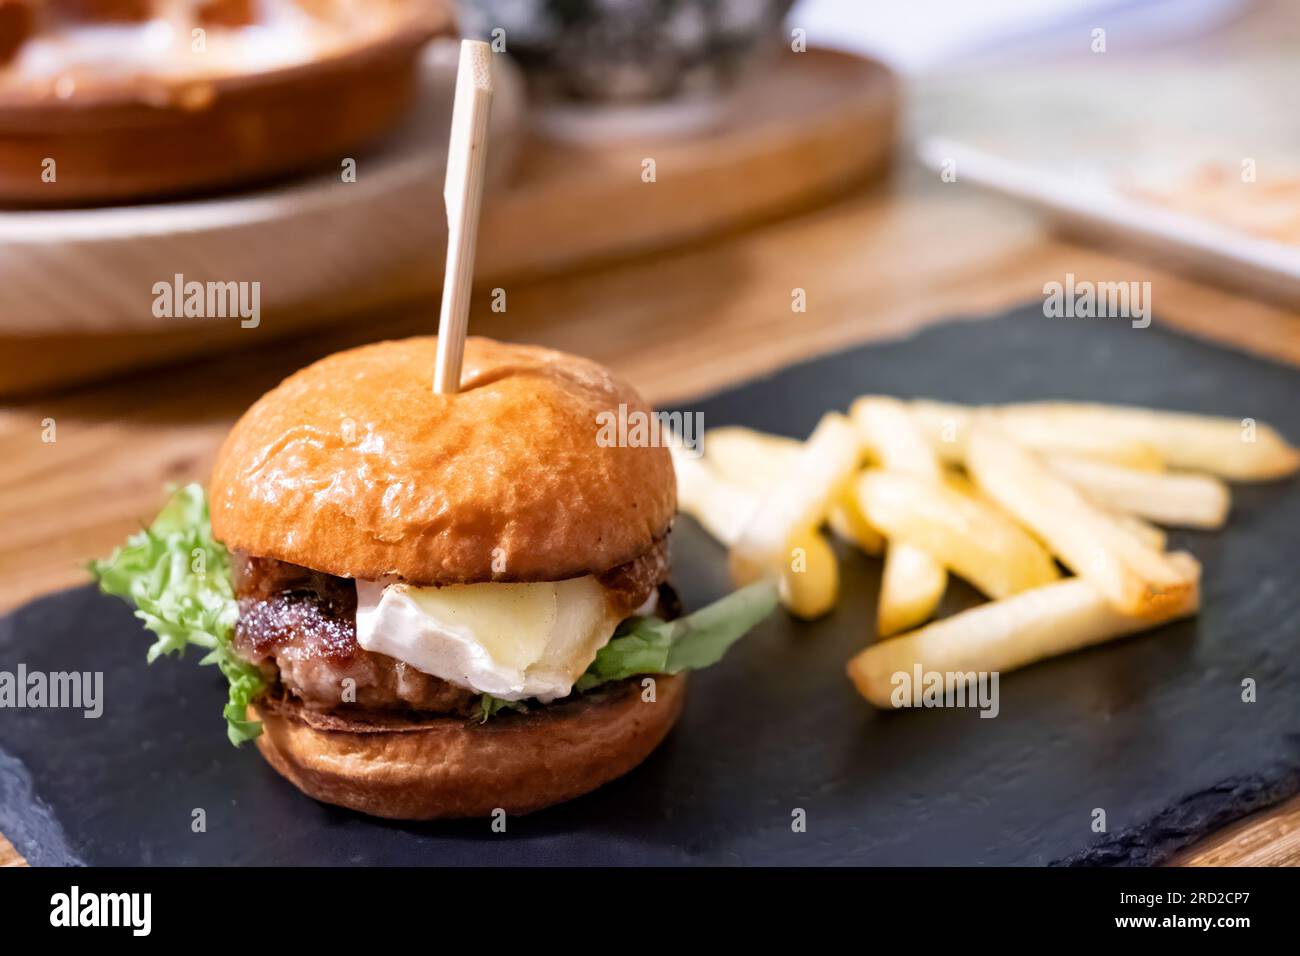 A single Tapas portion of a small beef burger topped with brie cheese served with french fries in a Tapas bar. Stock Photo